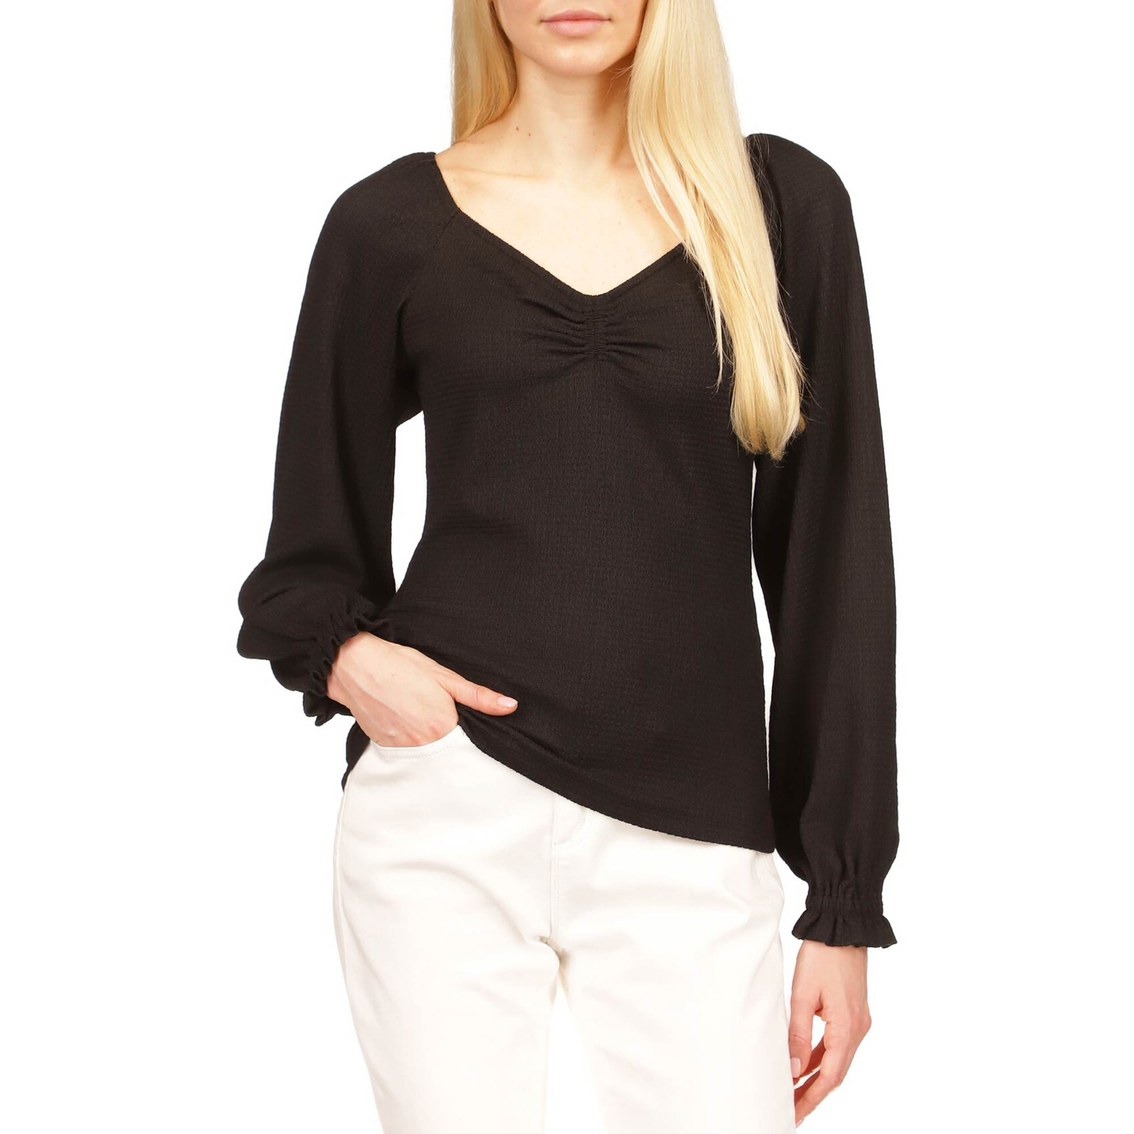 Michael Kors Puff Sleeve Ruched Cuff Top | Tops | Clothing ...